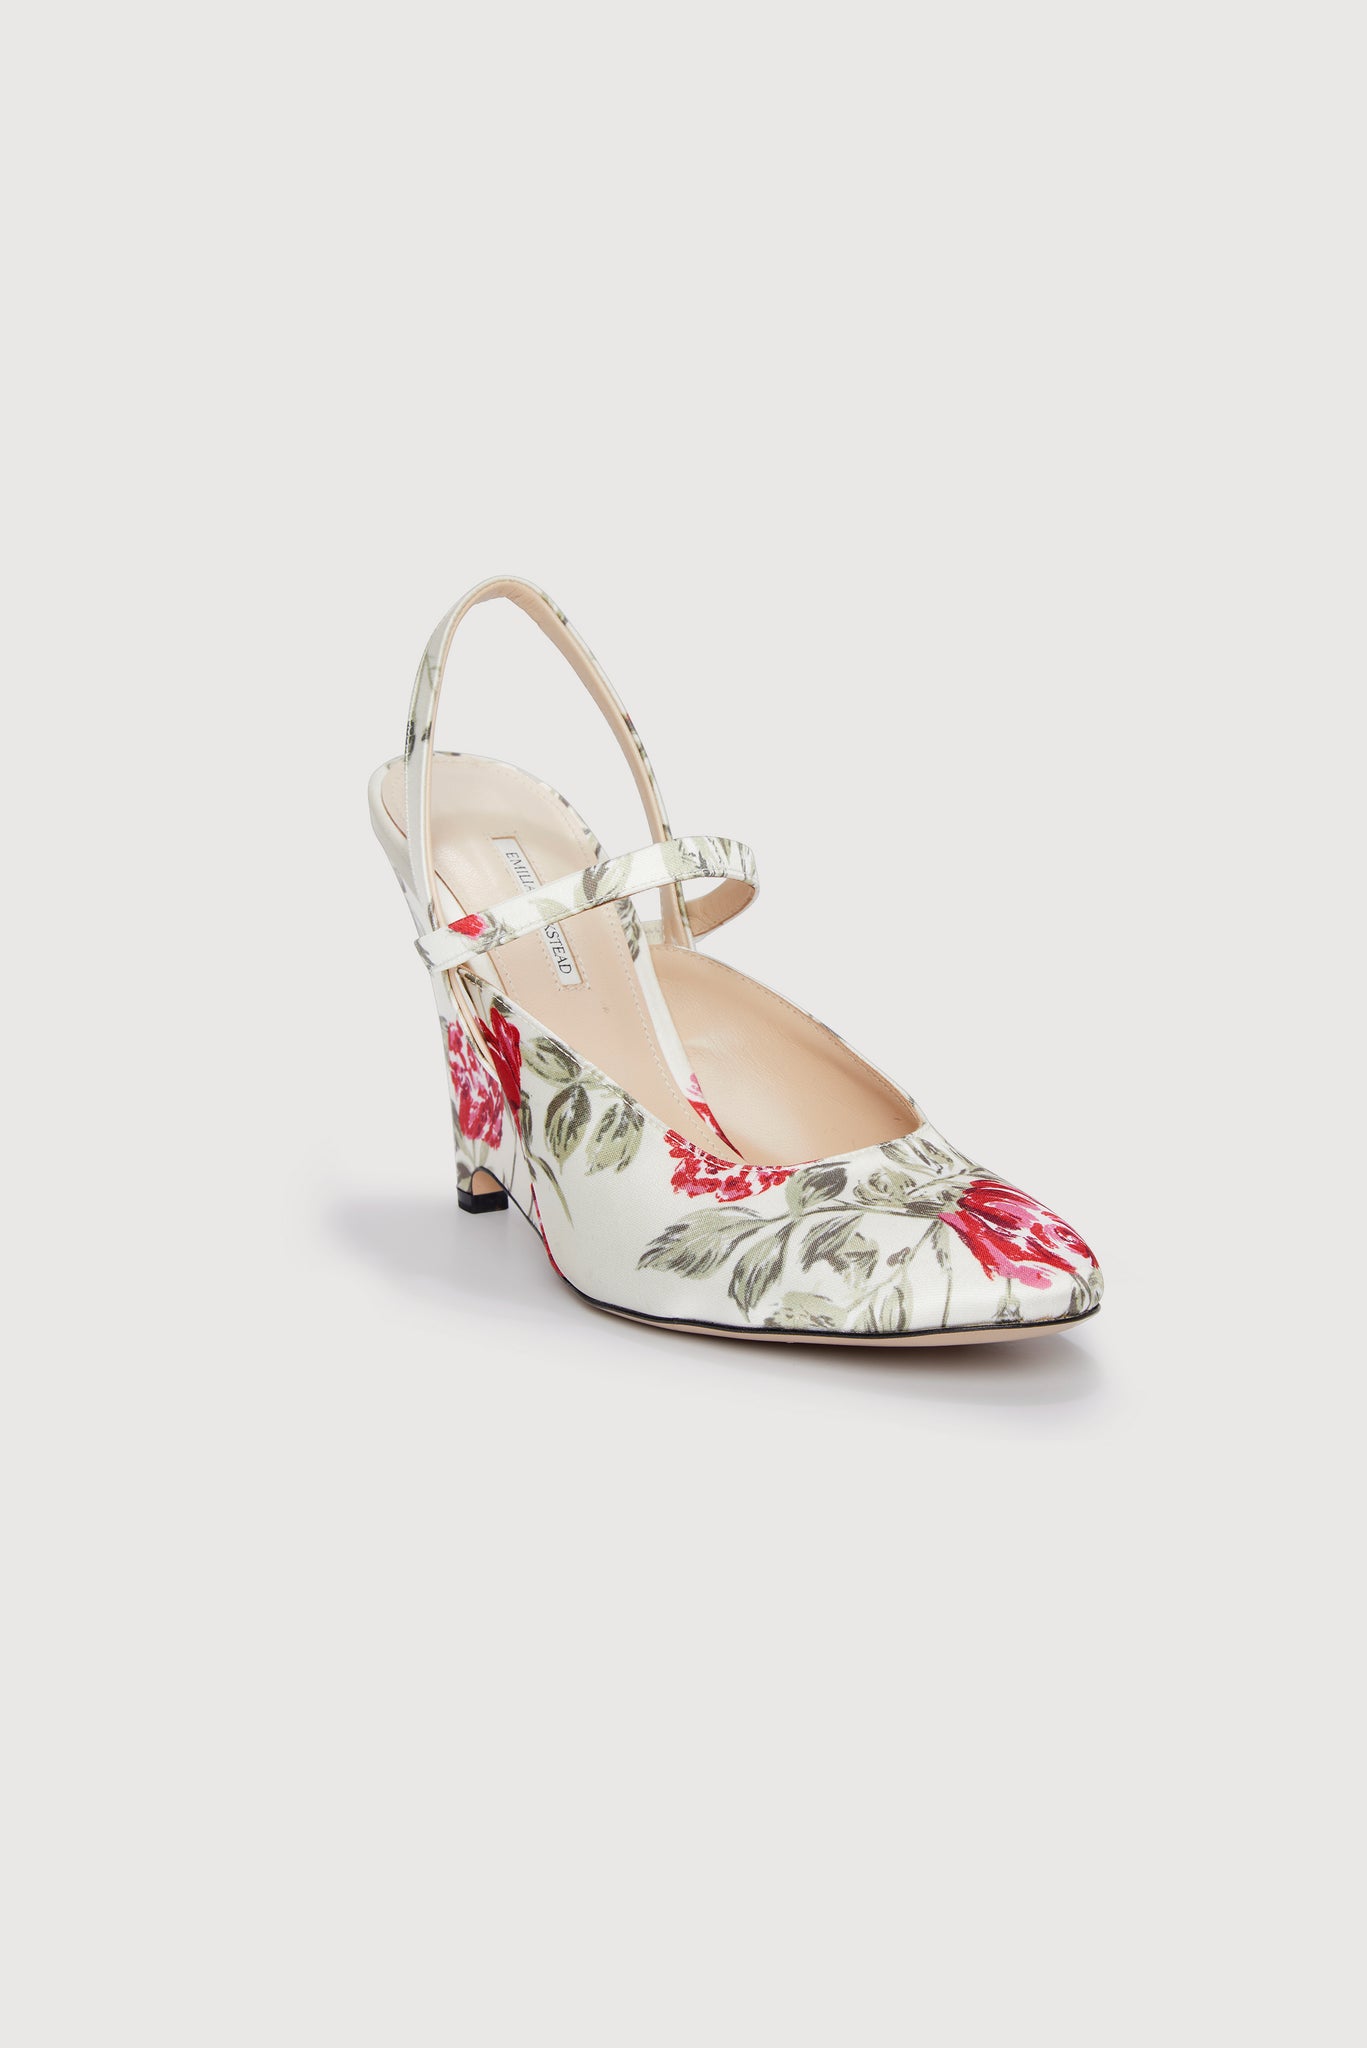 Aster Red Rose on Ivory Satin Floral Printed Wedge Shoes | Emilia Wickstead